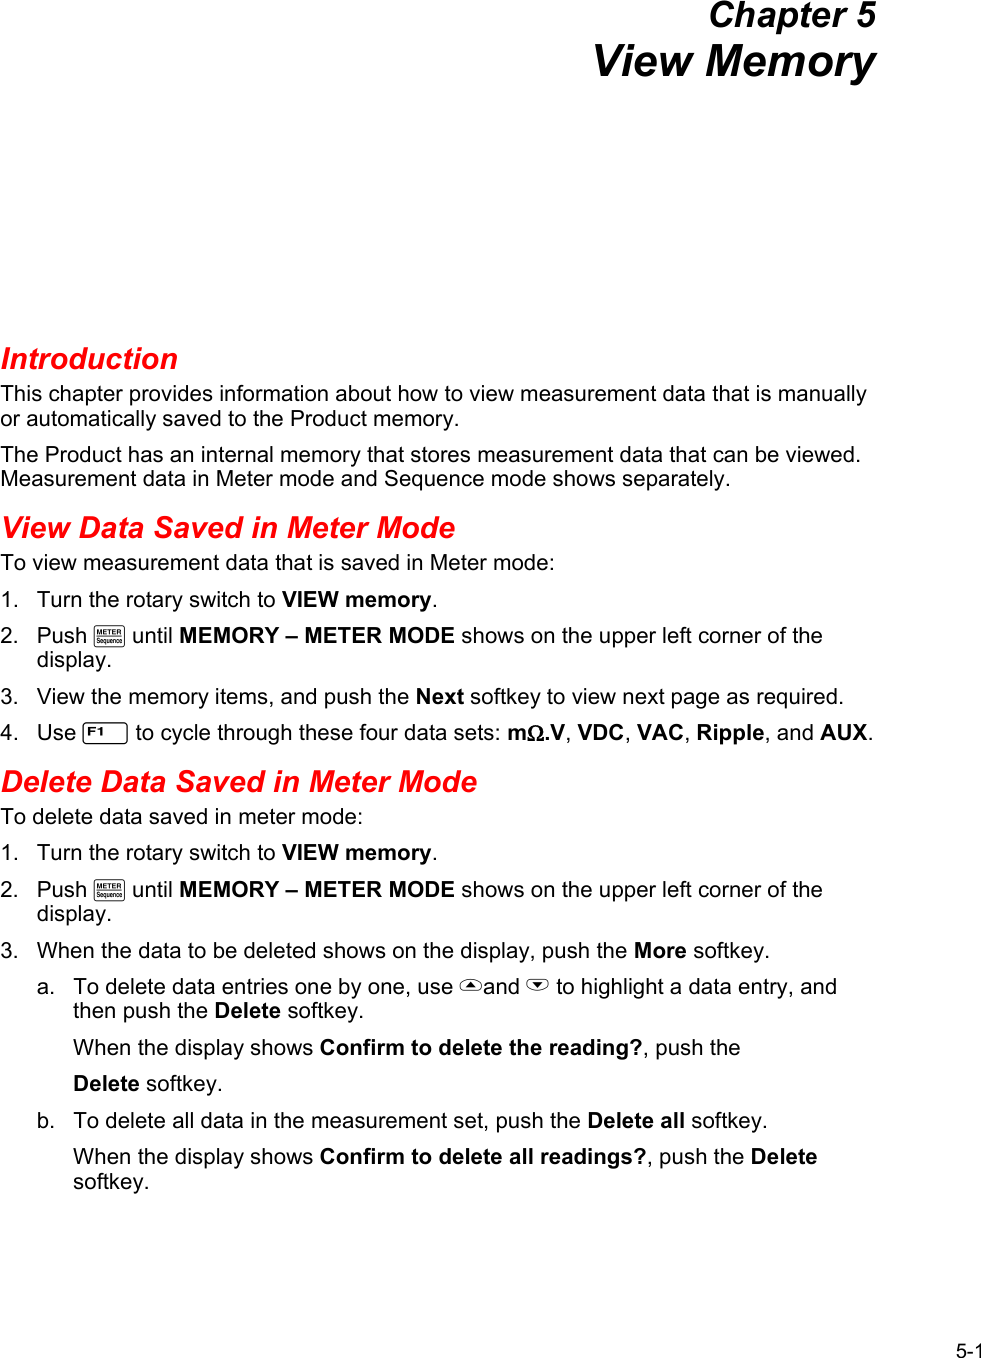 5-1 Chapter 5 View Memory Introduction This chapter provides information about how to view measurement data that is manually or automatically saved to the Product memory. The Product has an internal memory that stores measurement data that can be viewed. Measurement data in Meter mode and Sequence mode shows separately.  View Data Saved in Meter Mode To view measurement data that is saved in Meter mode: 1.  Turn the rotary switch to VIEW memory. 2. Push M until MEMORY – METER MODE shows on the upper left corner of the display. 3.  View the memory items, and push the Next softkey to view next page as required. 4. Use 1 to cycle through these four data sets: mΩ.V, VDC, VAC, Ripple, and AUX.  Delete Data Saved in Meter Mode To delete data saved in meter mode: 1.  Turn the rotary switch to VIEW memory. 2. Push M until MEMORY – METER MODE shows on the upper left corner of the display. 3.  When the data to be deleted shows on the display, push the More softkey.  a.  To delete data entries one by one, use and L to highlight a data entry, and then push the Delete softkey. When the display shows Confirm to delete the reading?, push the  Delete softkey. b.  To delete all data in the measurement set, push the Delete all softkey.  When the display shows Confirm to delete all readings?, push the Delete softkey. 